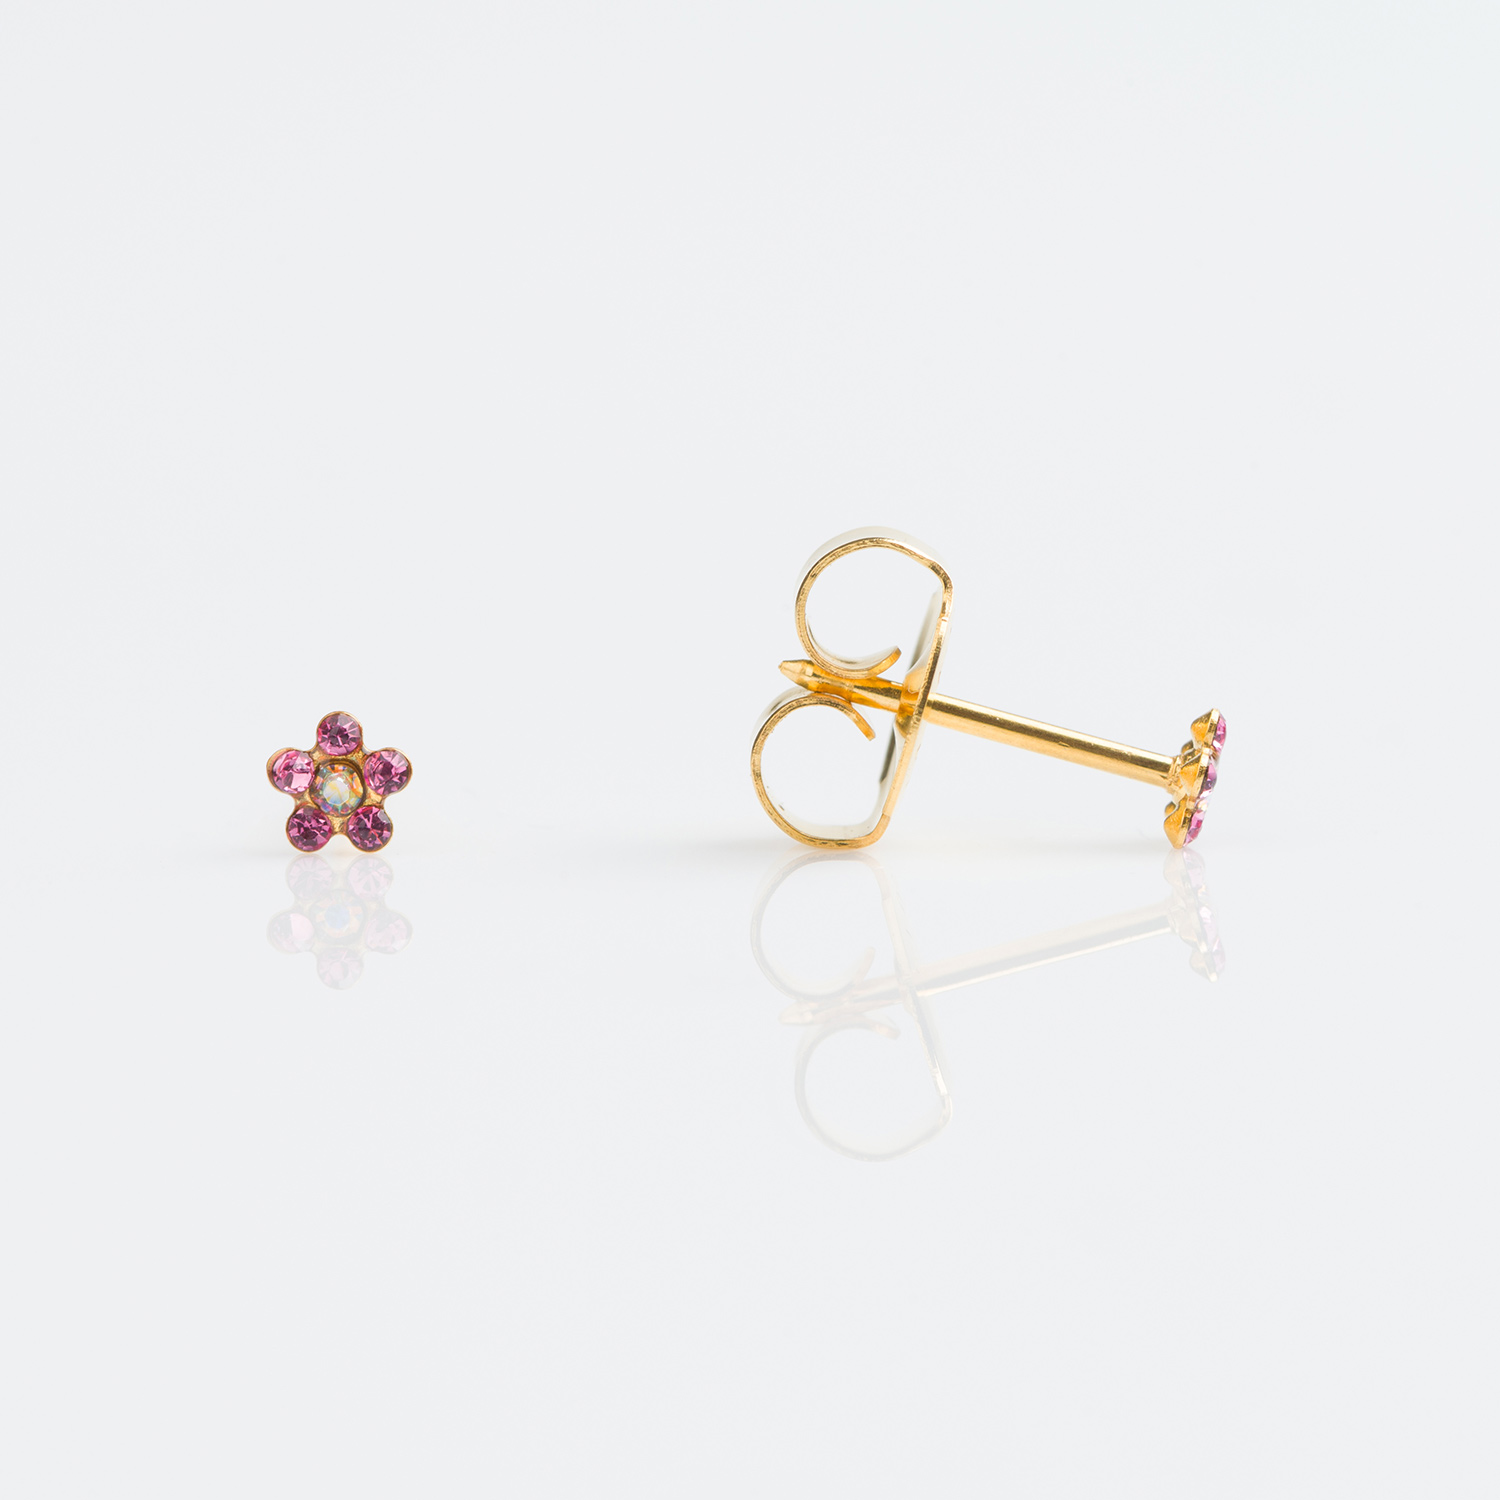 7581-6015 – Studex Gold Plated Baby Daisy Rose-Ab Crystal Short Post Piercing Earrings